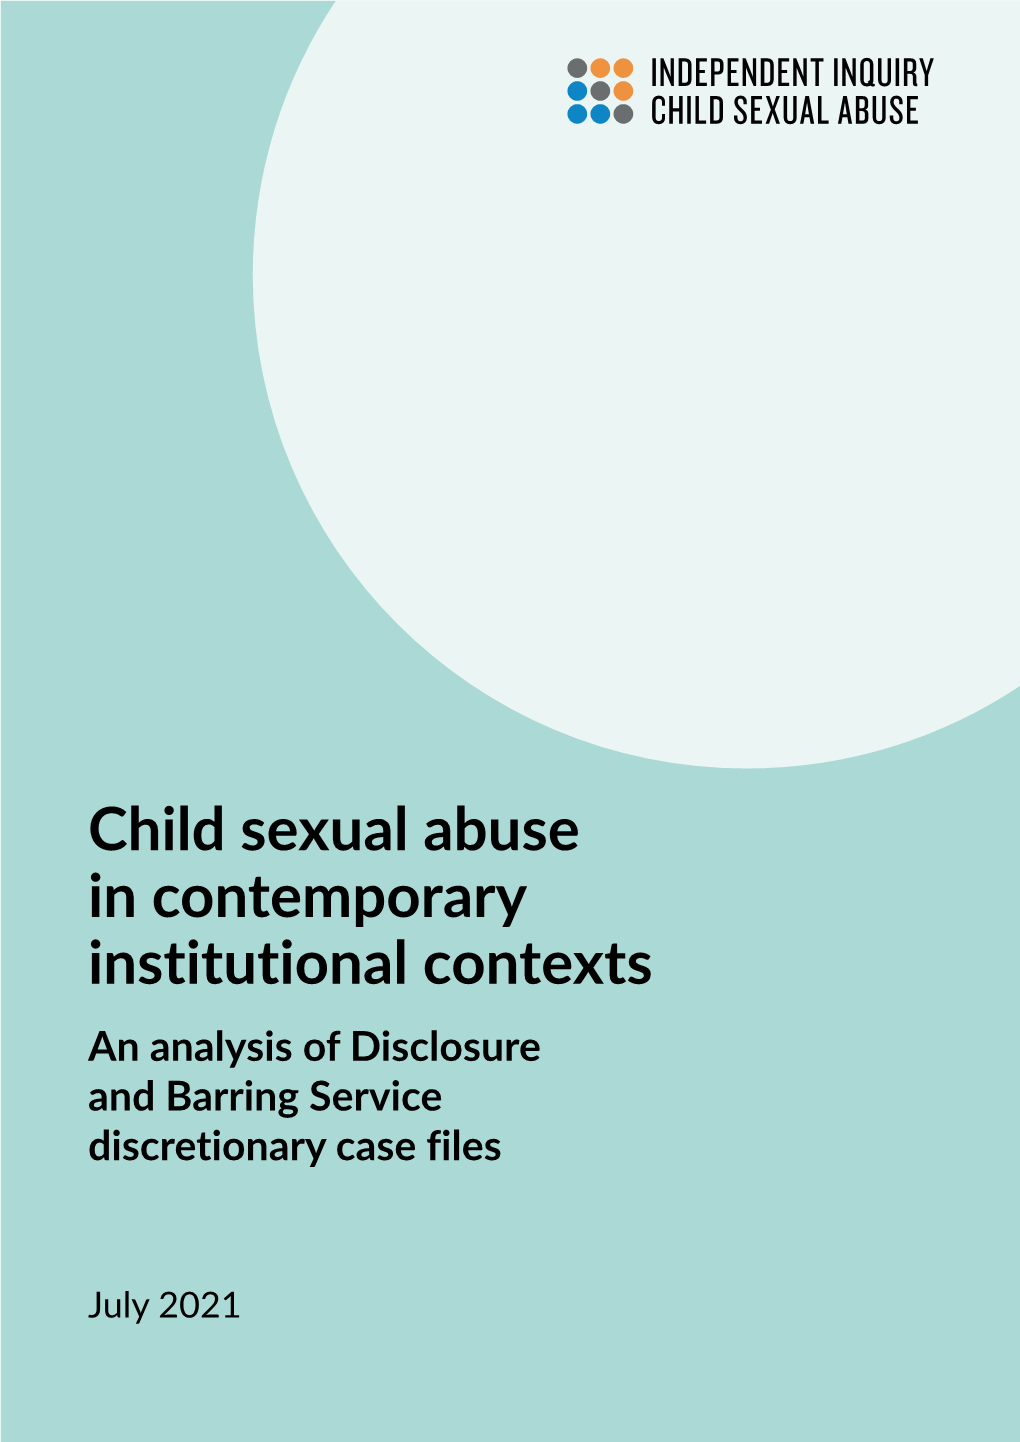 Child Sexual Abuse in Contemporary Institutional Contexts an Analysis of Disclosure and Barring Service Discretionary Case Files